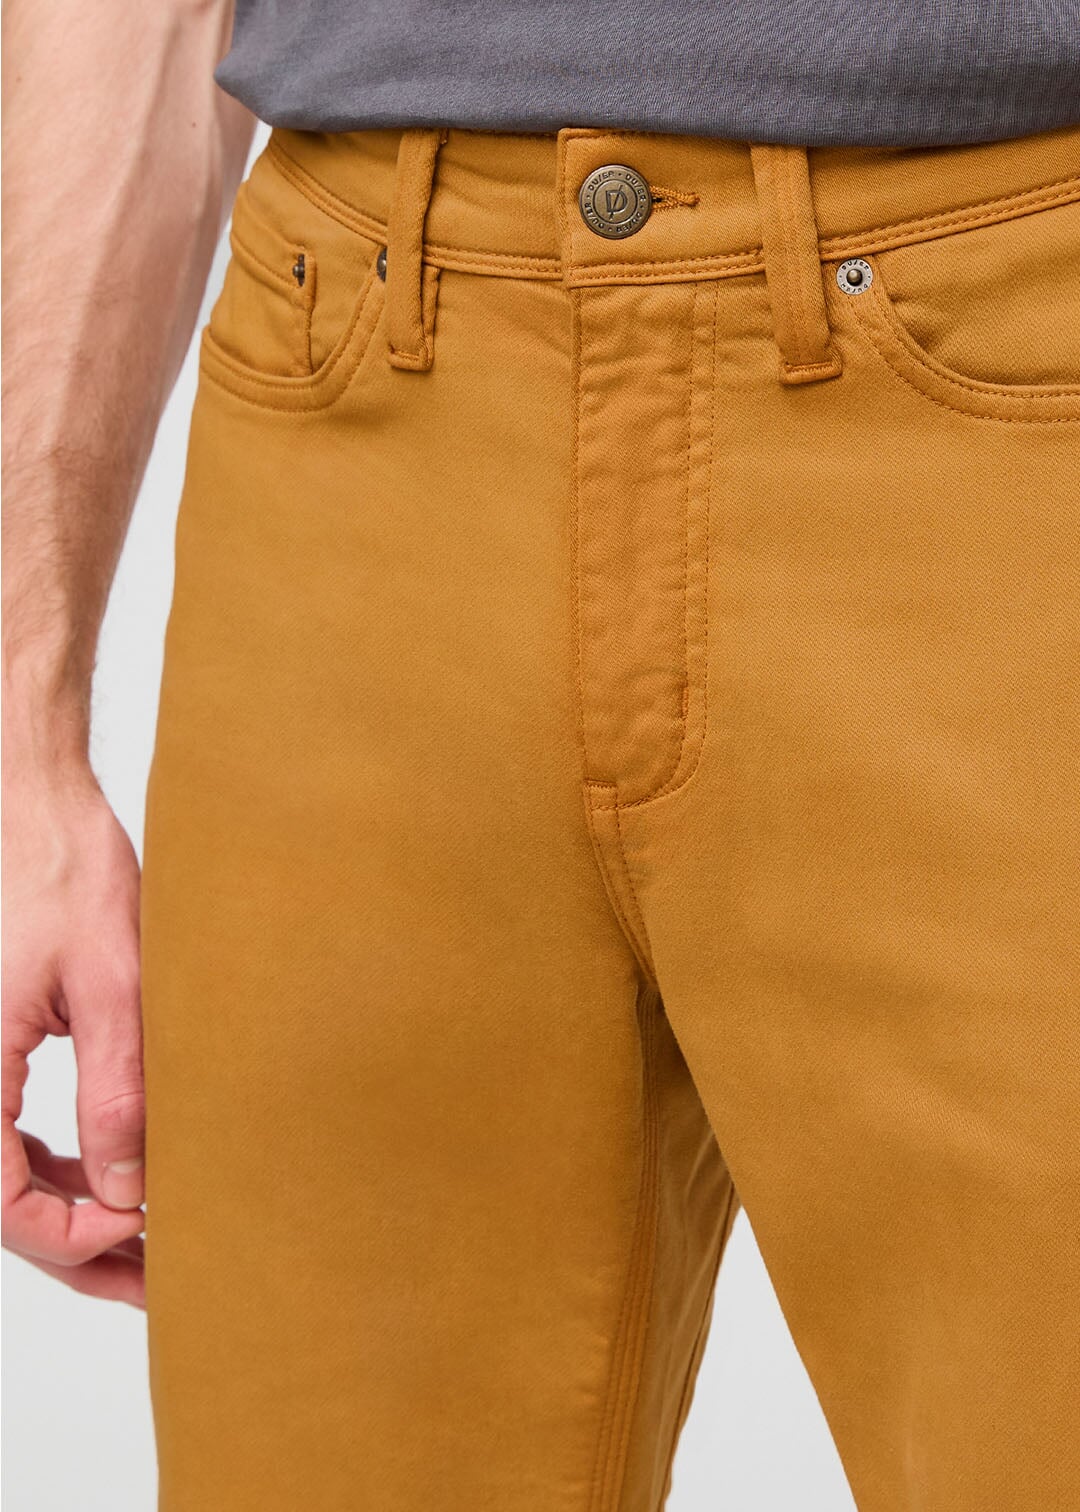 mens yellow slim fit dress sweatpant front waistband detail